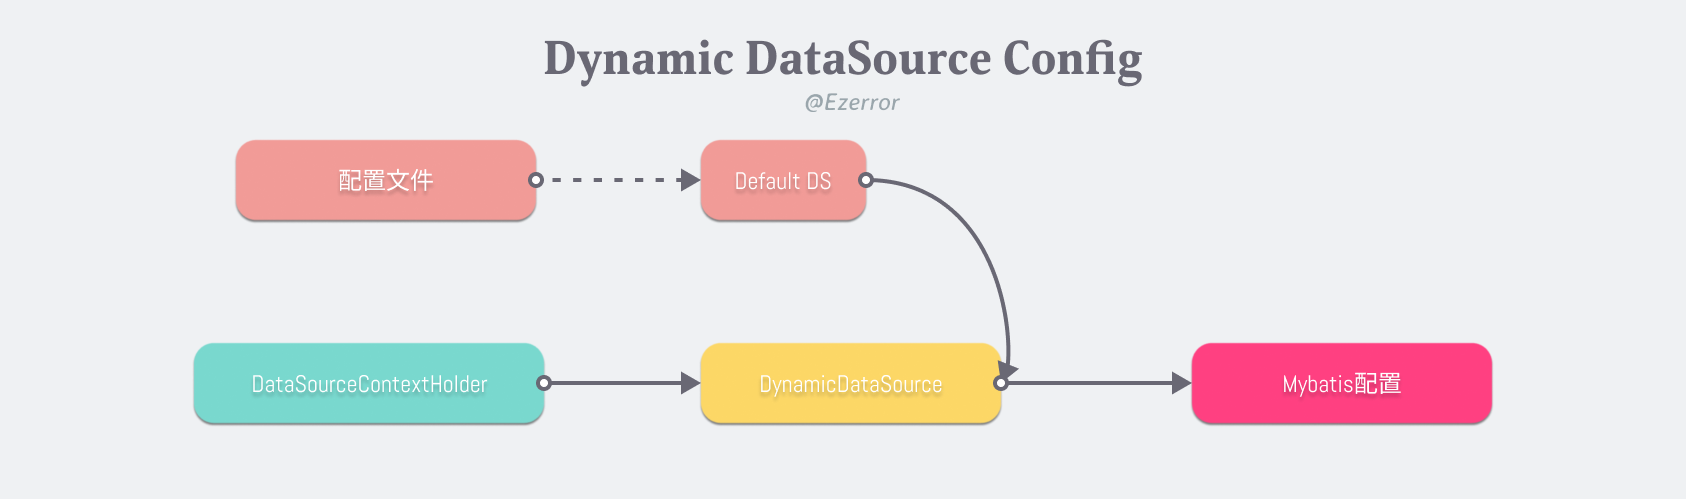 Dynamic DataSource Config